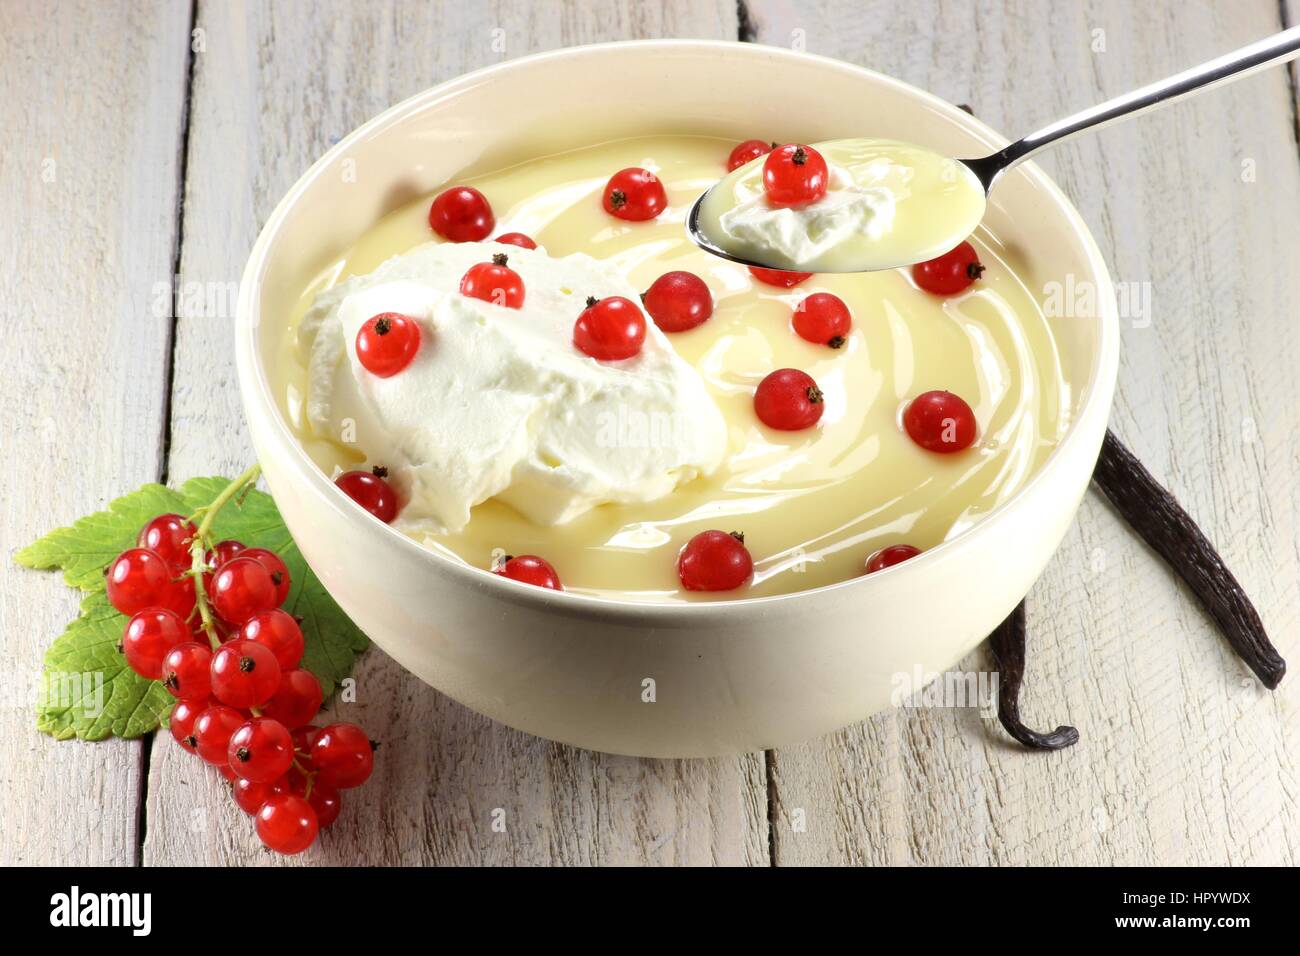 traditional Dutch custard served with red currants on wooden background Stock Photo